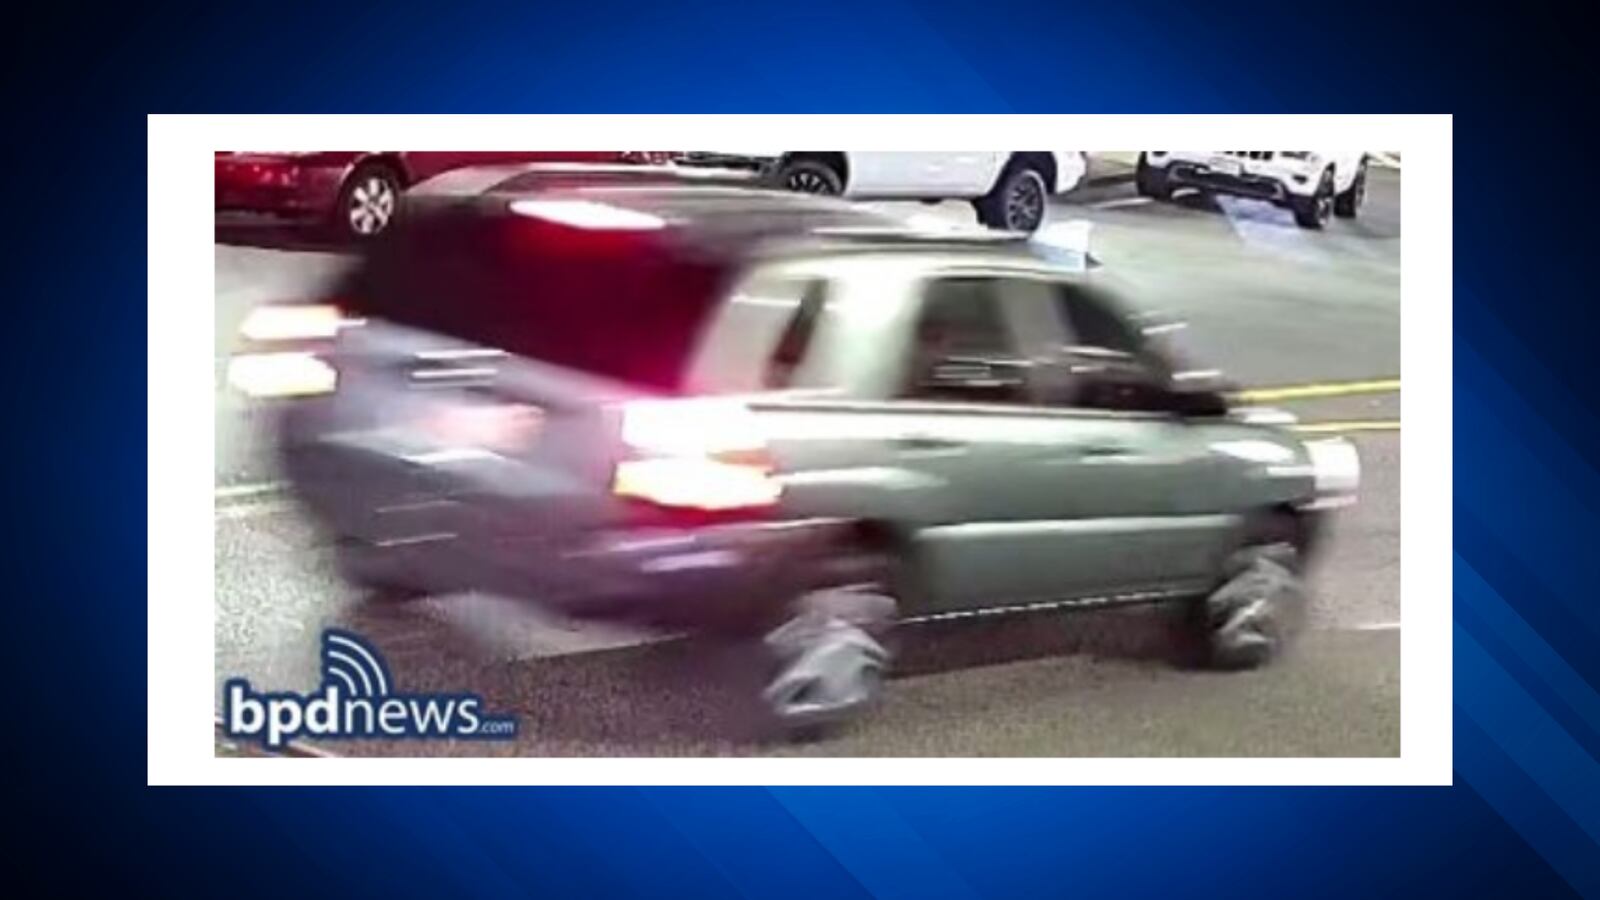 Boston Police Looking For Kia Sportage After Fatal Hit And Run Crash In Dorchester Boston 25 News 